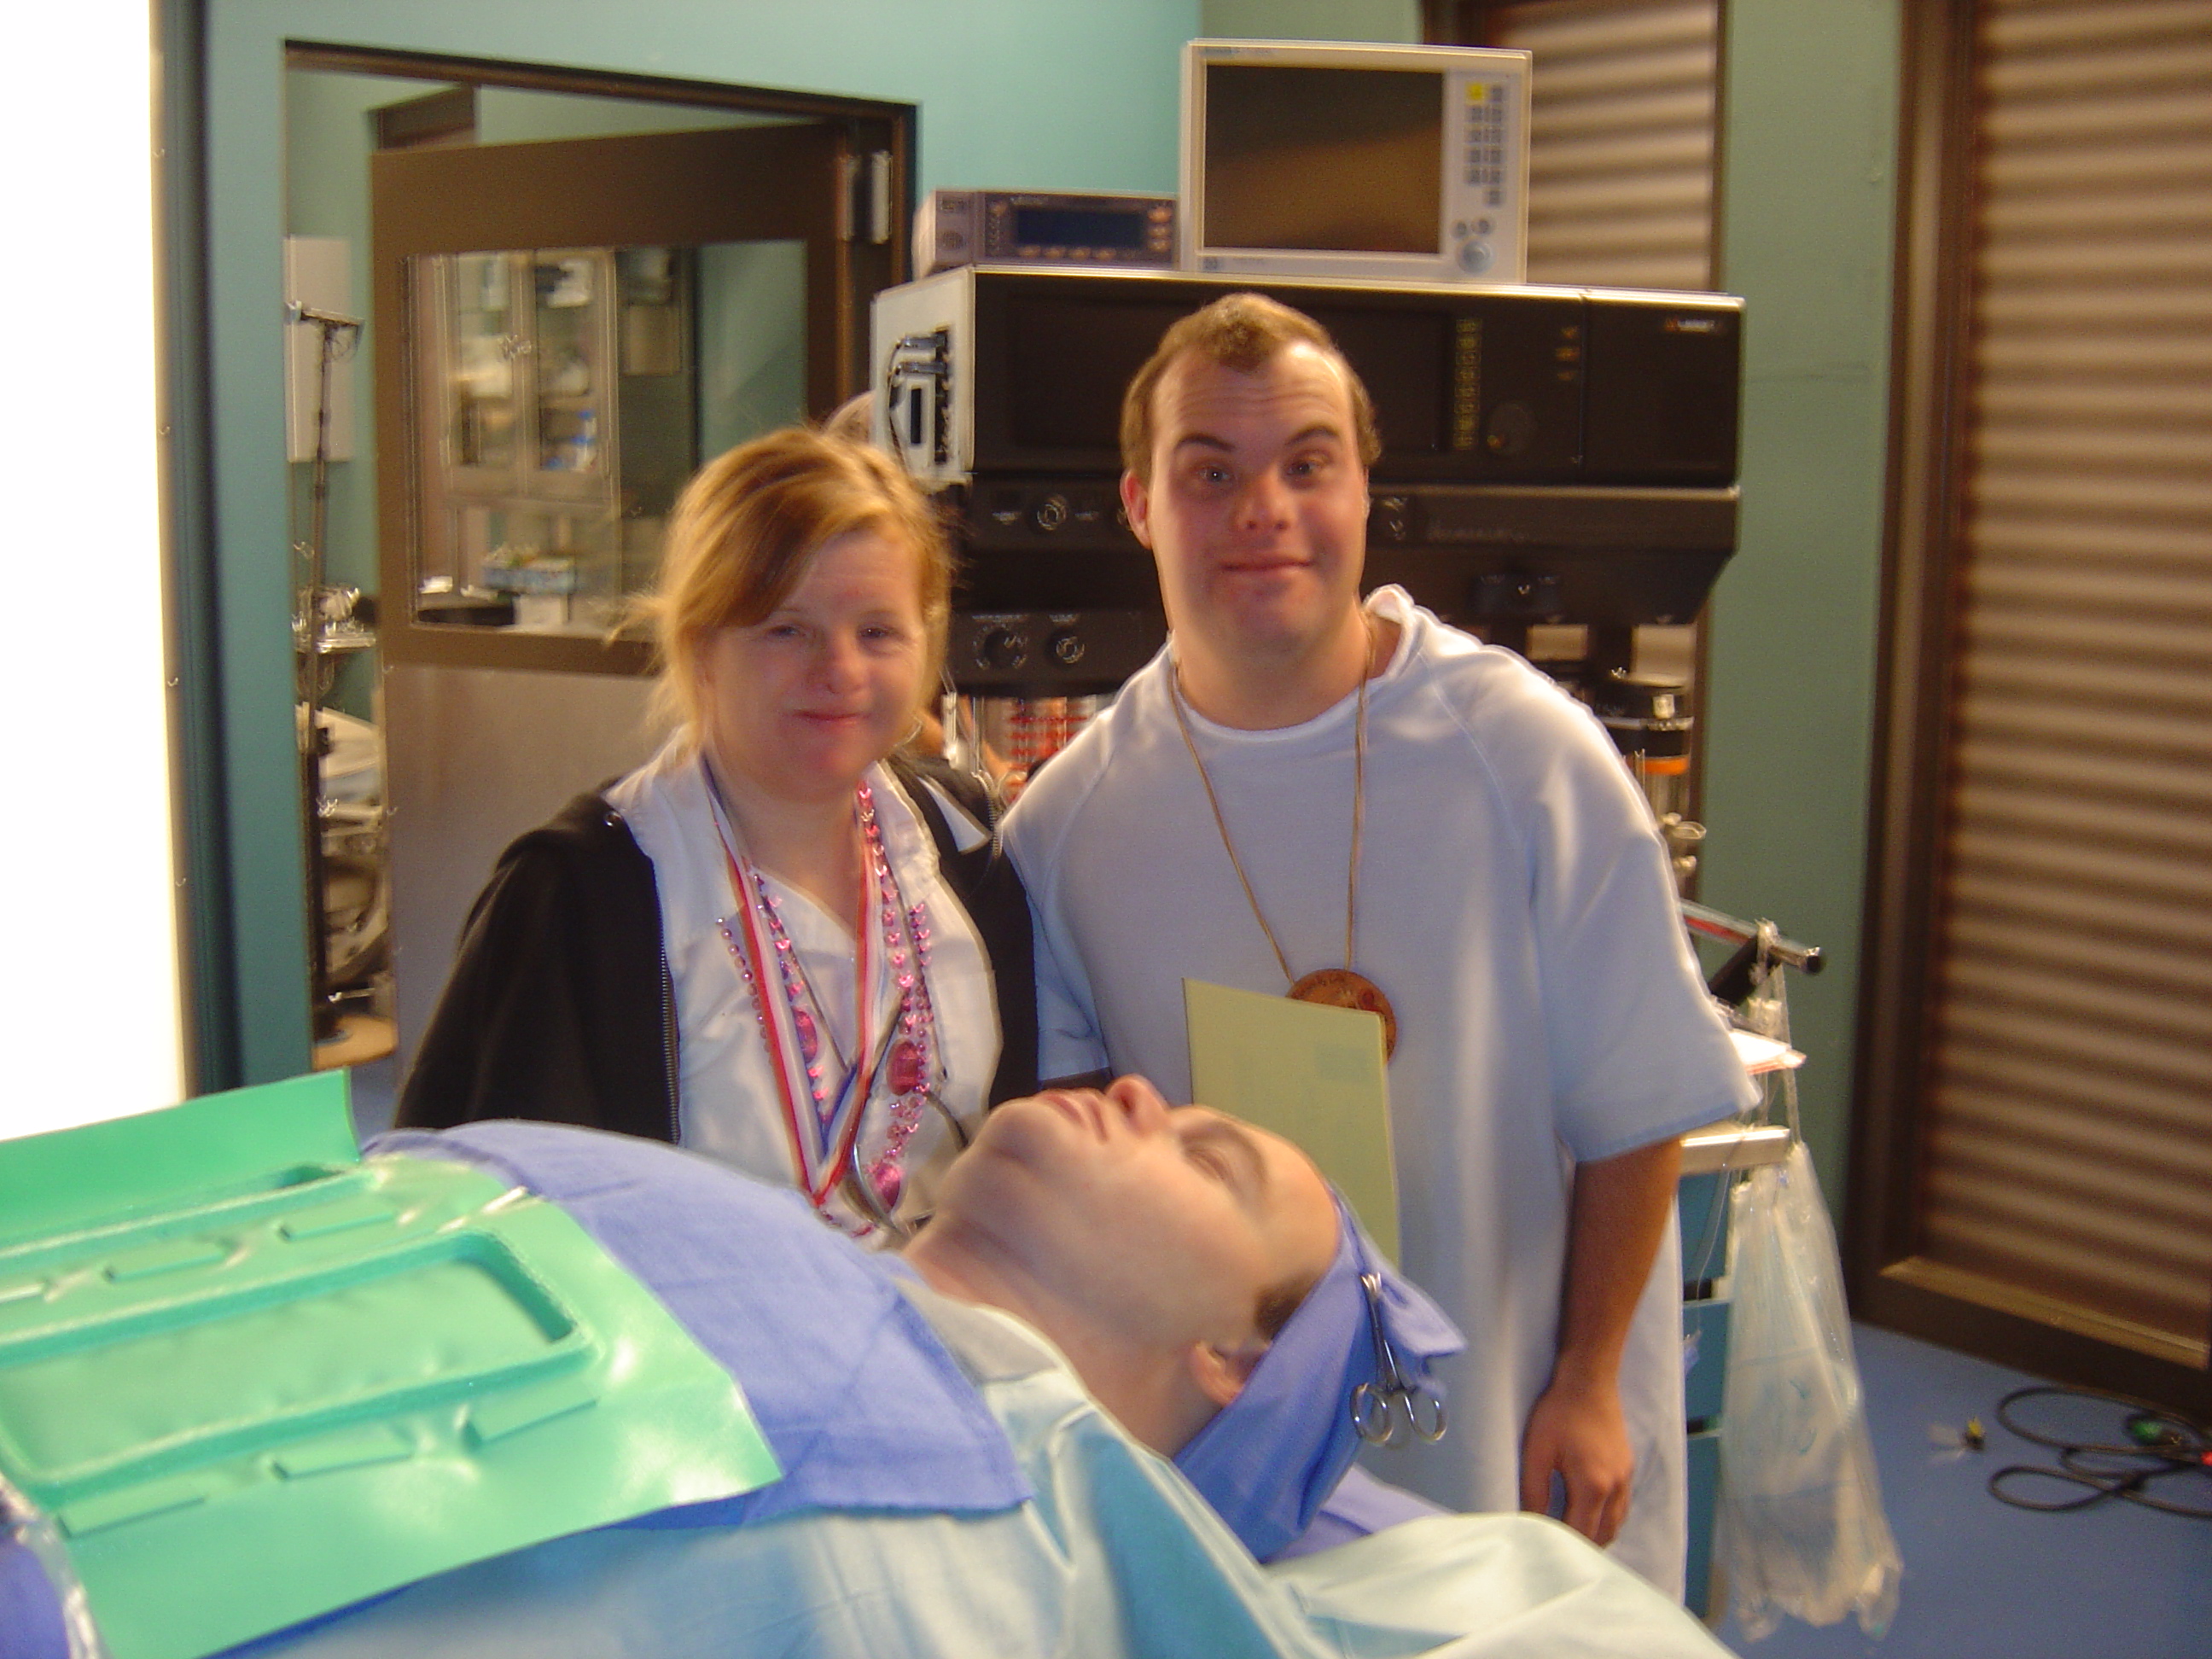 Blair Williamson and his girlfriend Susie standing over the FAKE BLAIR about to get filmed having surgery on NIP/TUCK